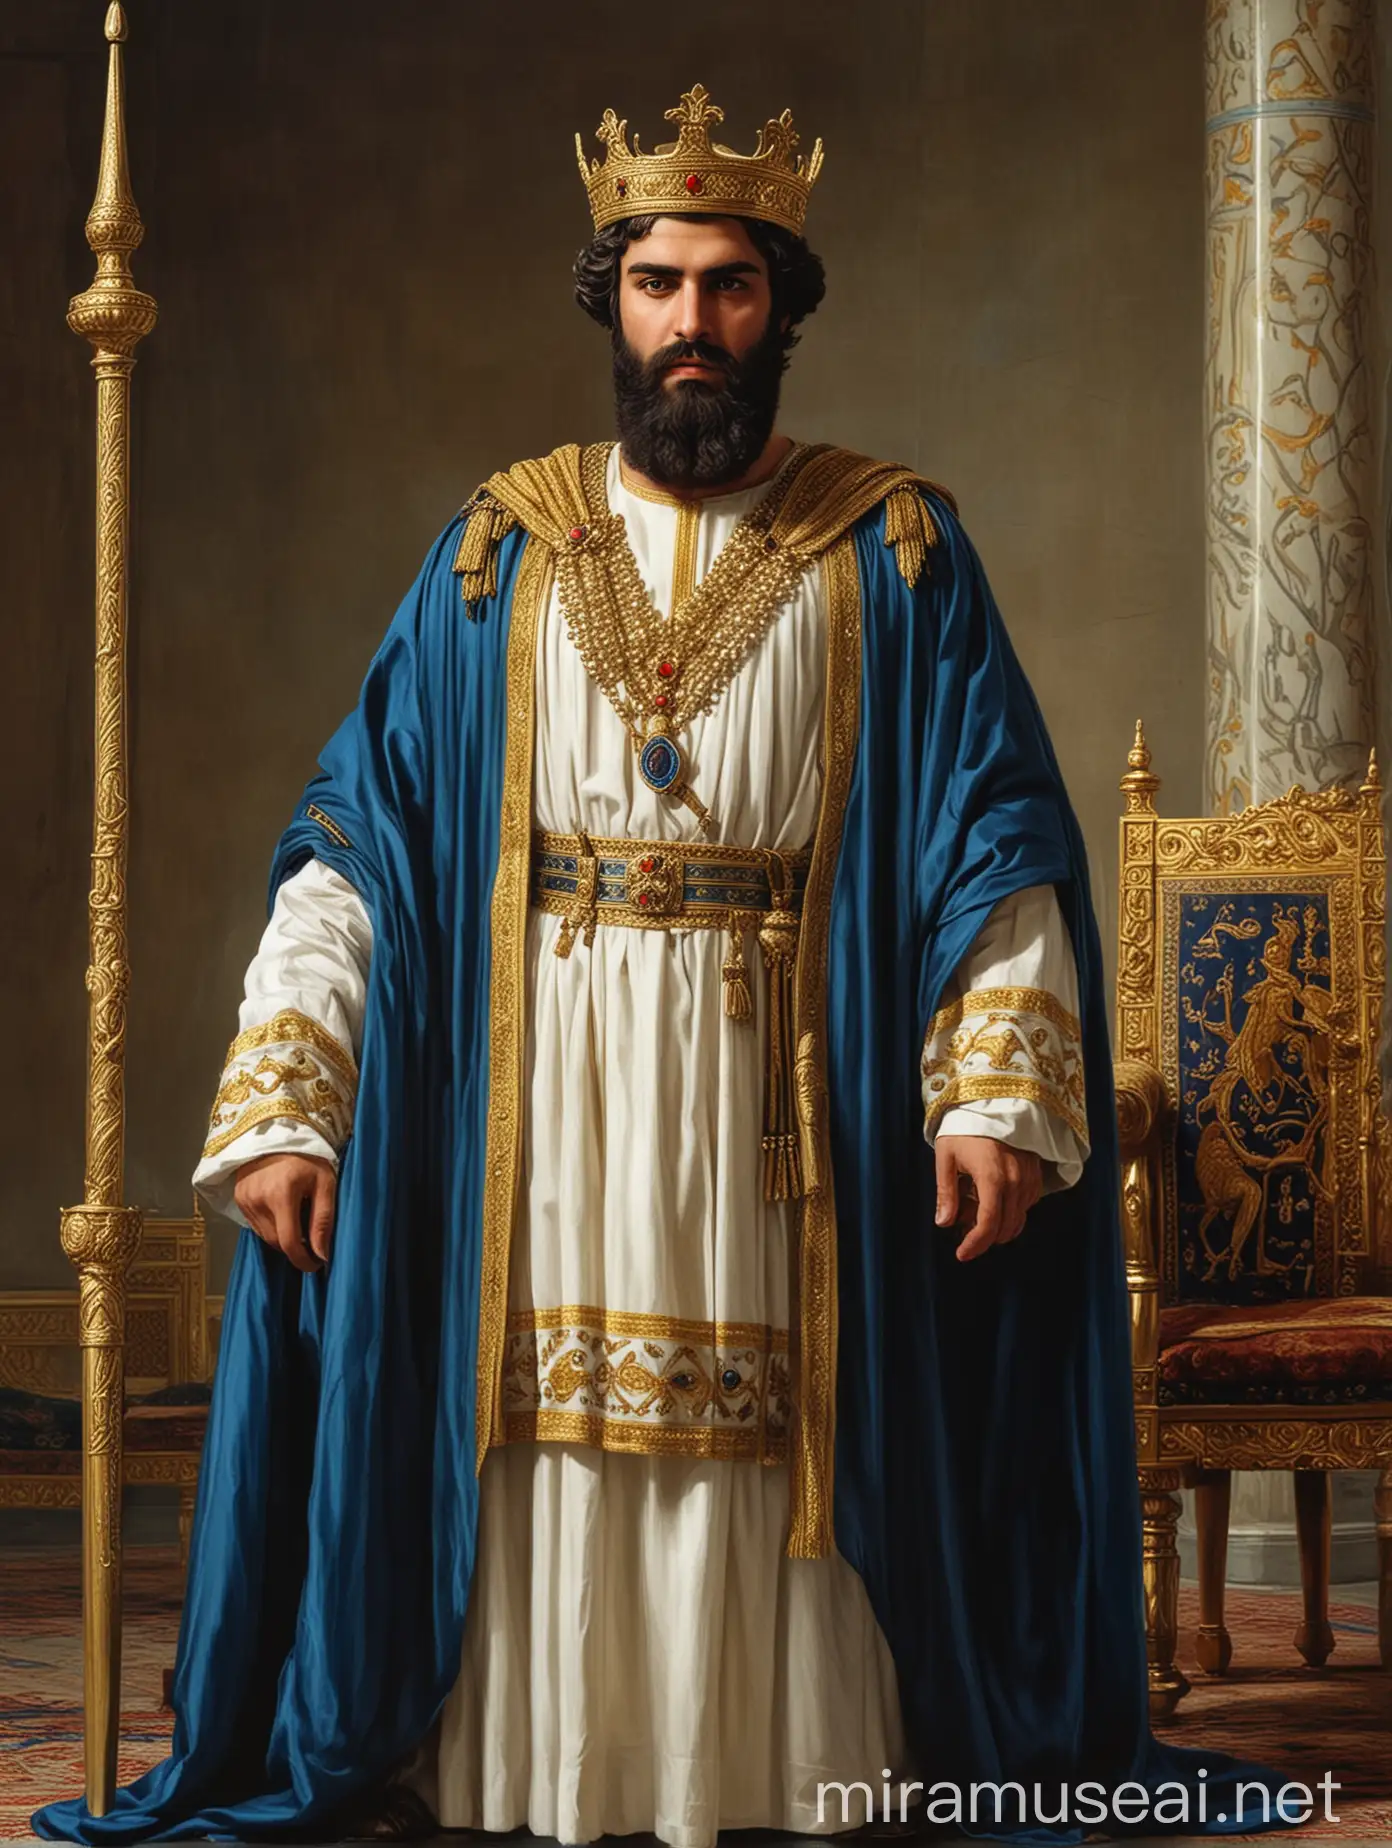 Cyrus the Great, the Persian king of the Achaemenid period, standing in front of the royal throne, short curly hair and beard, a long golden crown on his head, white clothes with a blue cloak, one hand is a golden scepter and the other hand is a sign of high leadership, lighting Professional, f 1